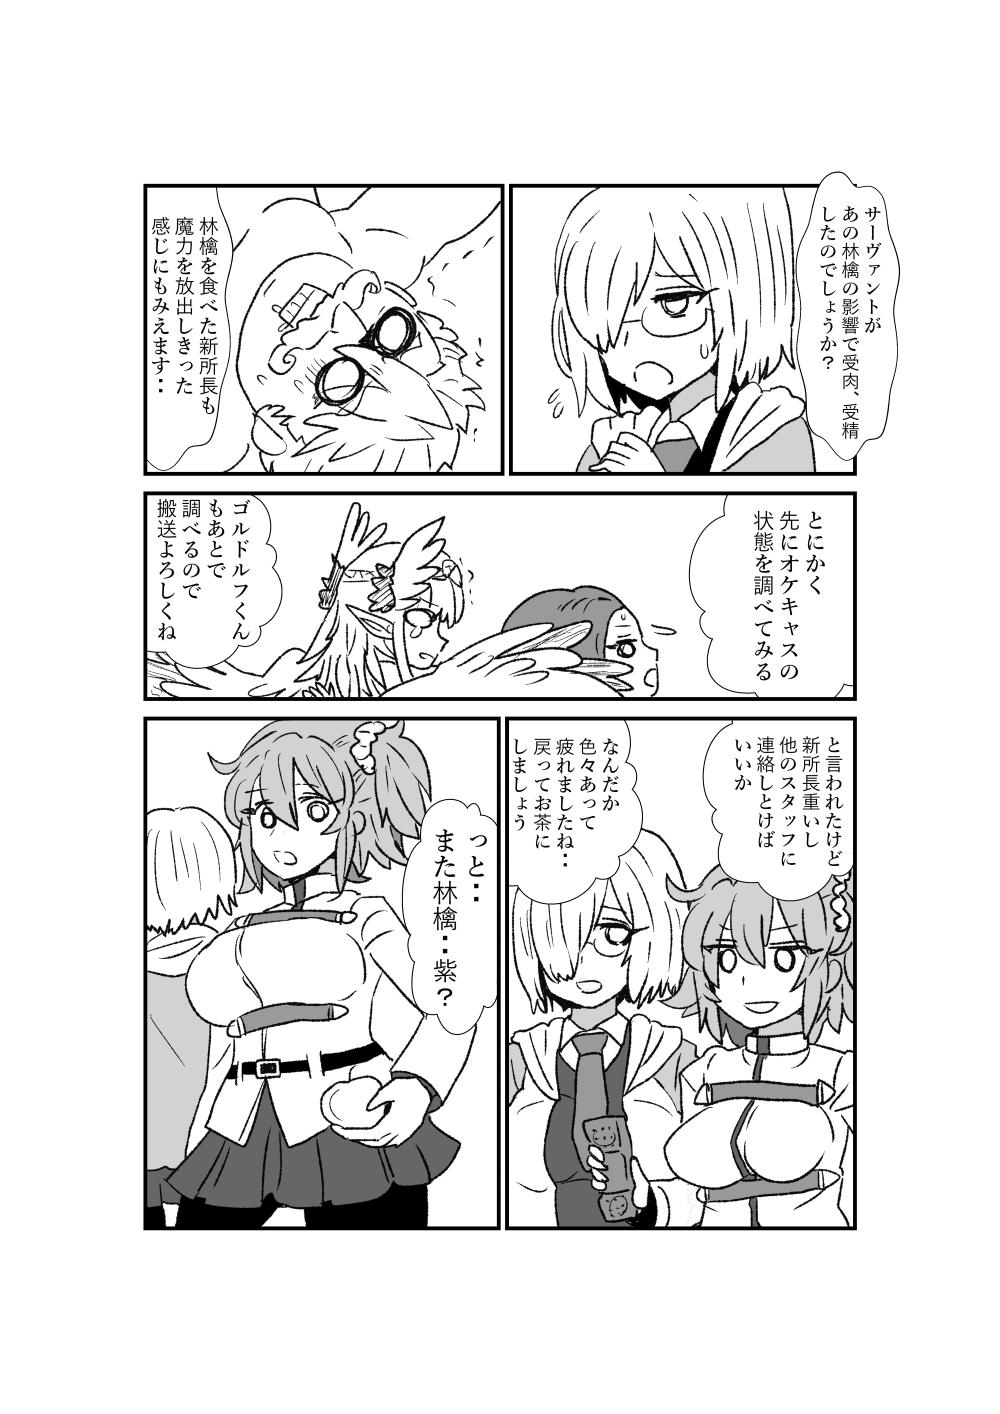 Dirty FPO~桃色林檎の種付け周回～ - Fate grand order Big Penis - Page 9